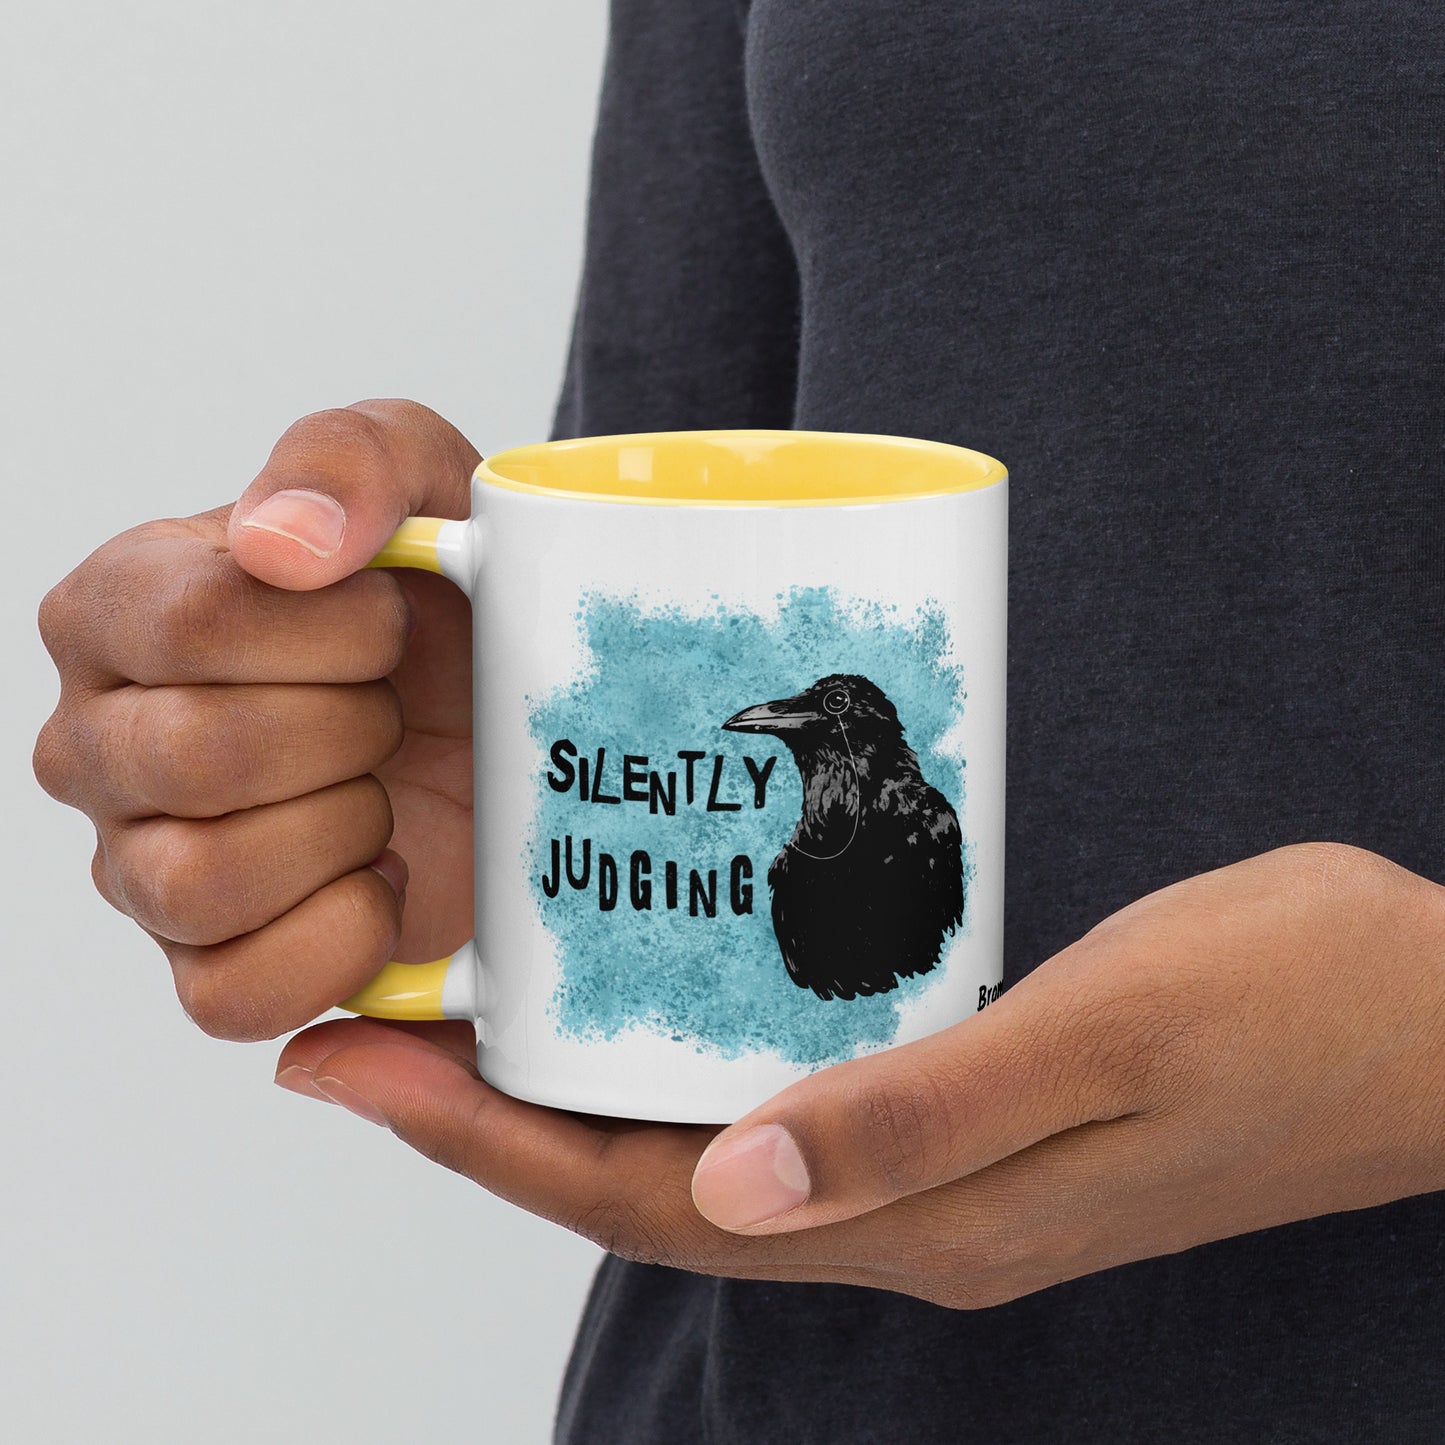 11 ounce ceramic mug with Silently Judging text next to a monacle-wearing crow on blue paint splatters. Double-sided design. Mug has yellow rim, handle, and inside. Shown in the hands of a model.